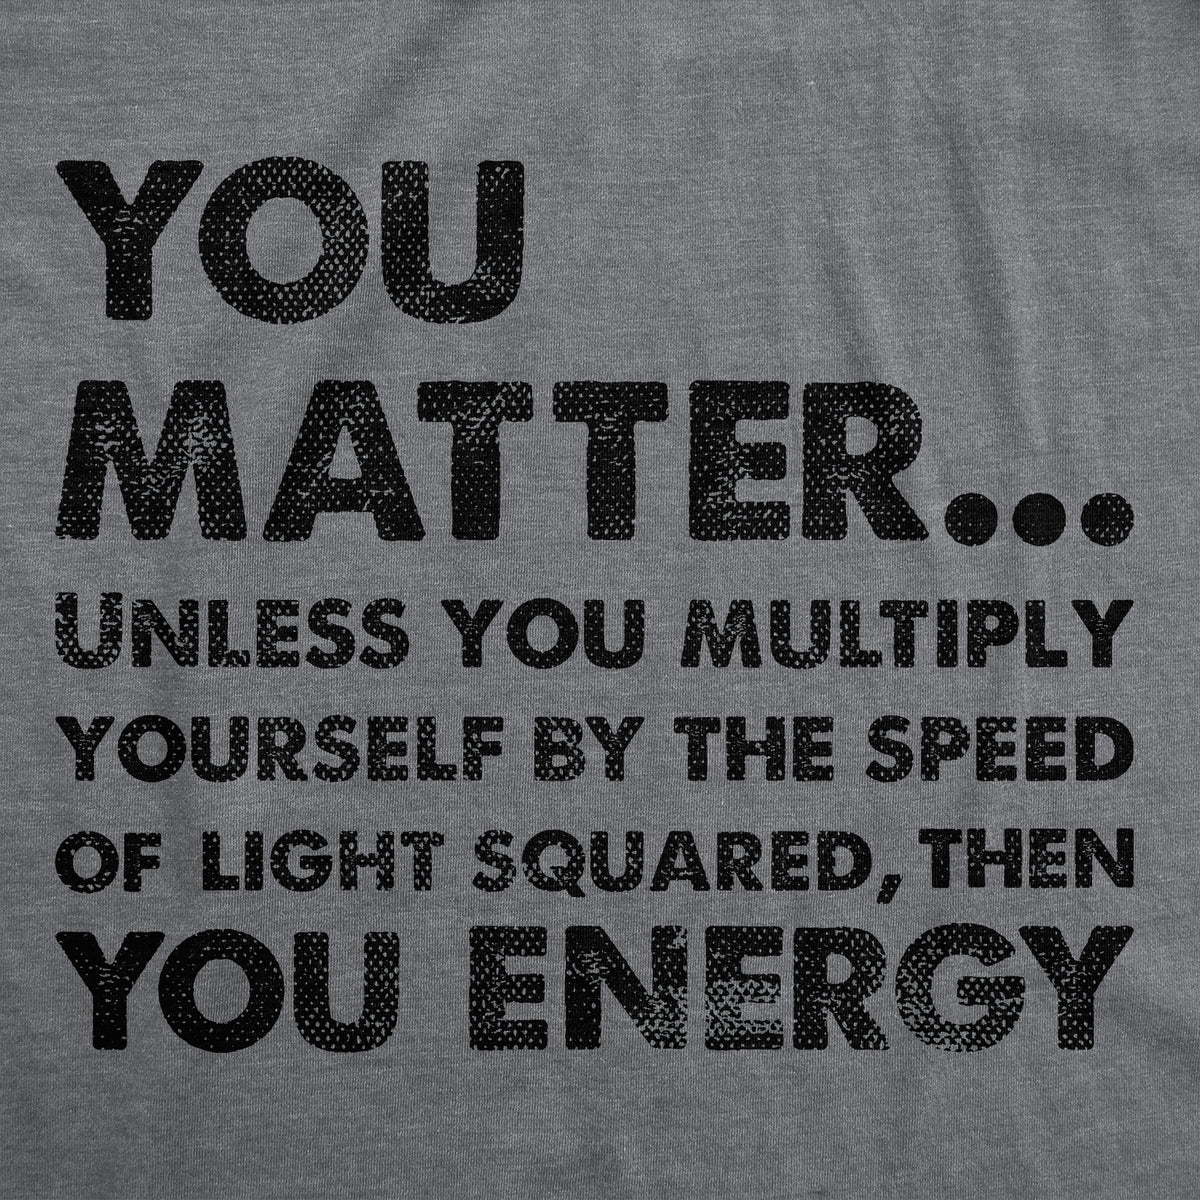 You Matter Unless You Multiply Yourself By The Speed Of Light Squared Then You Energy Women&#39;s T Shirt